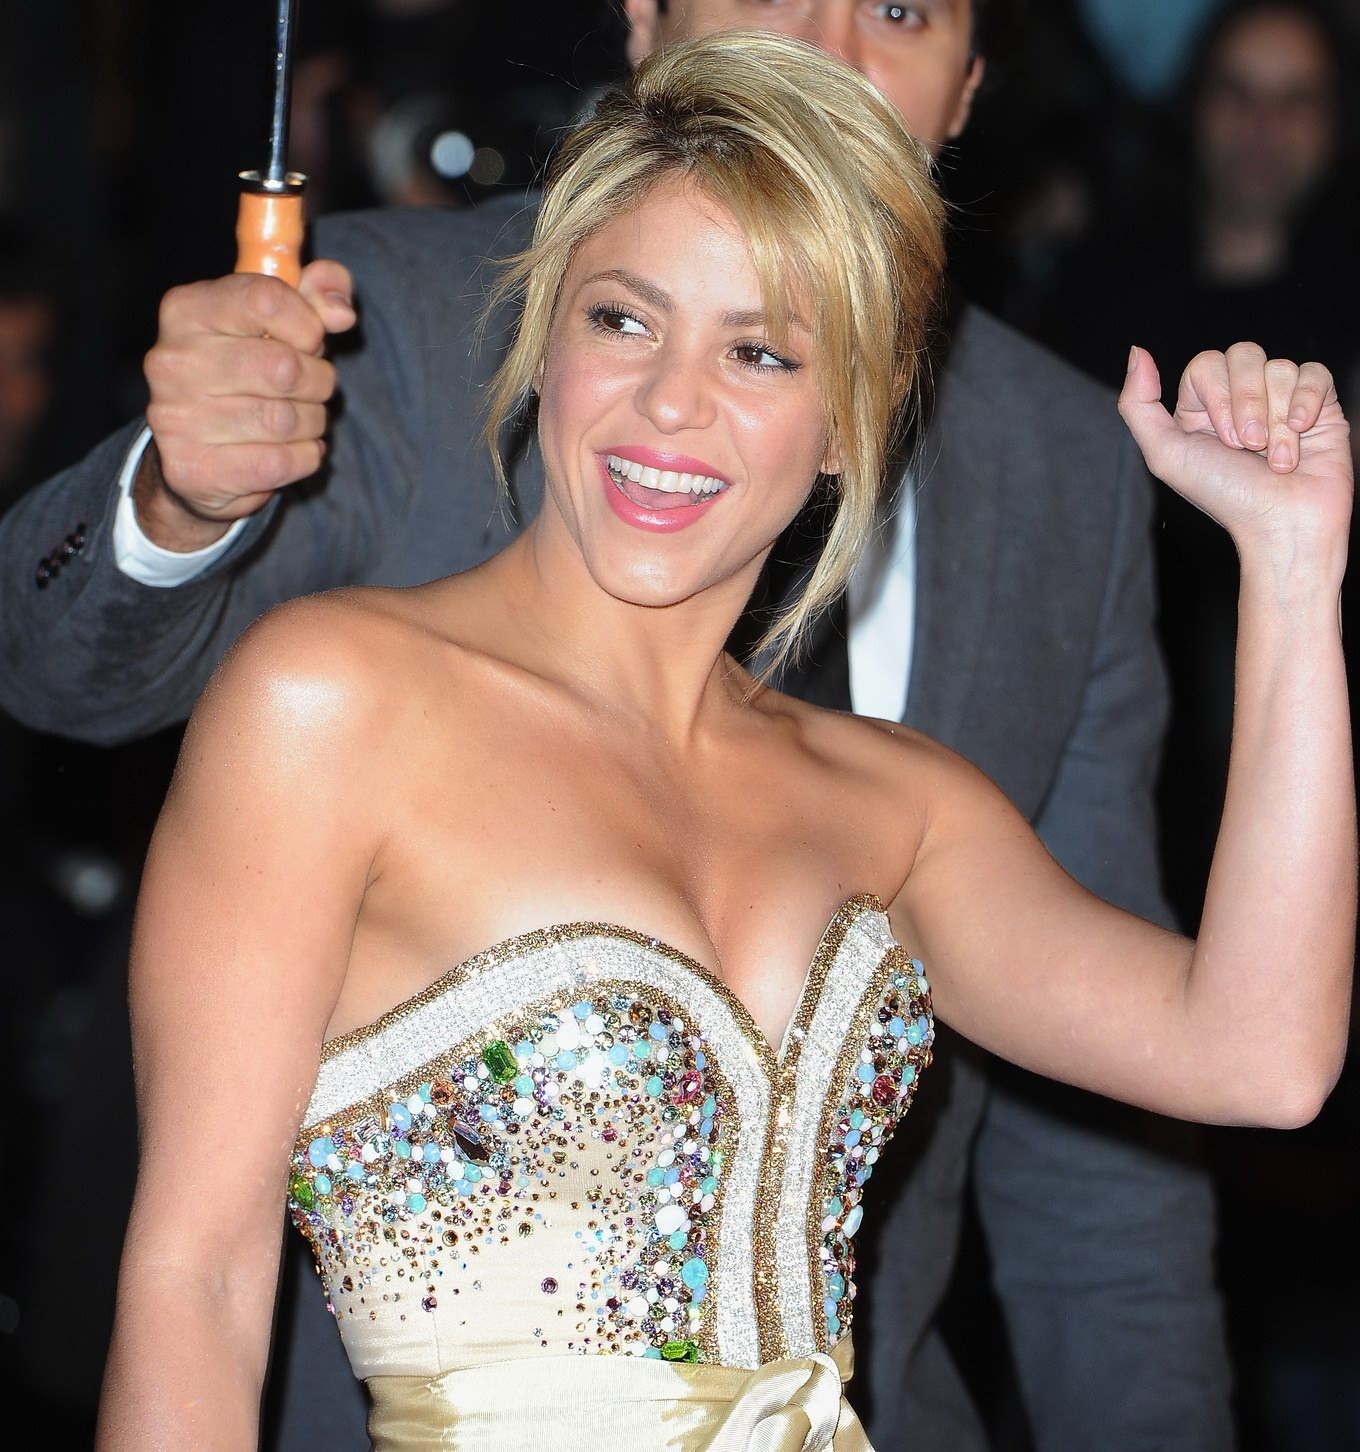 Shakira busty wearing a strapless little dress at NRJ Music Awards in Cannes #75275279